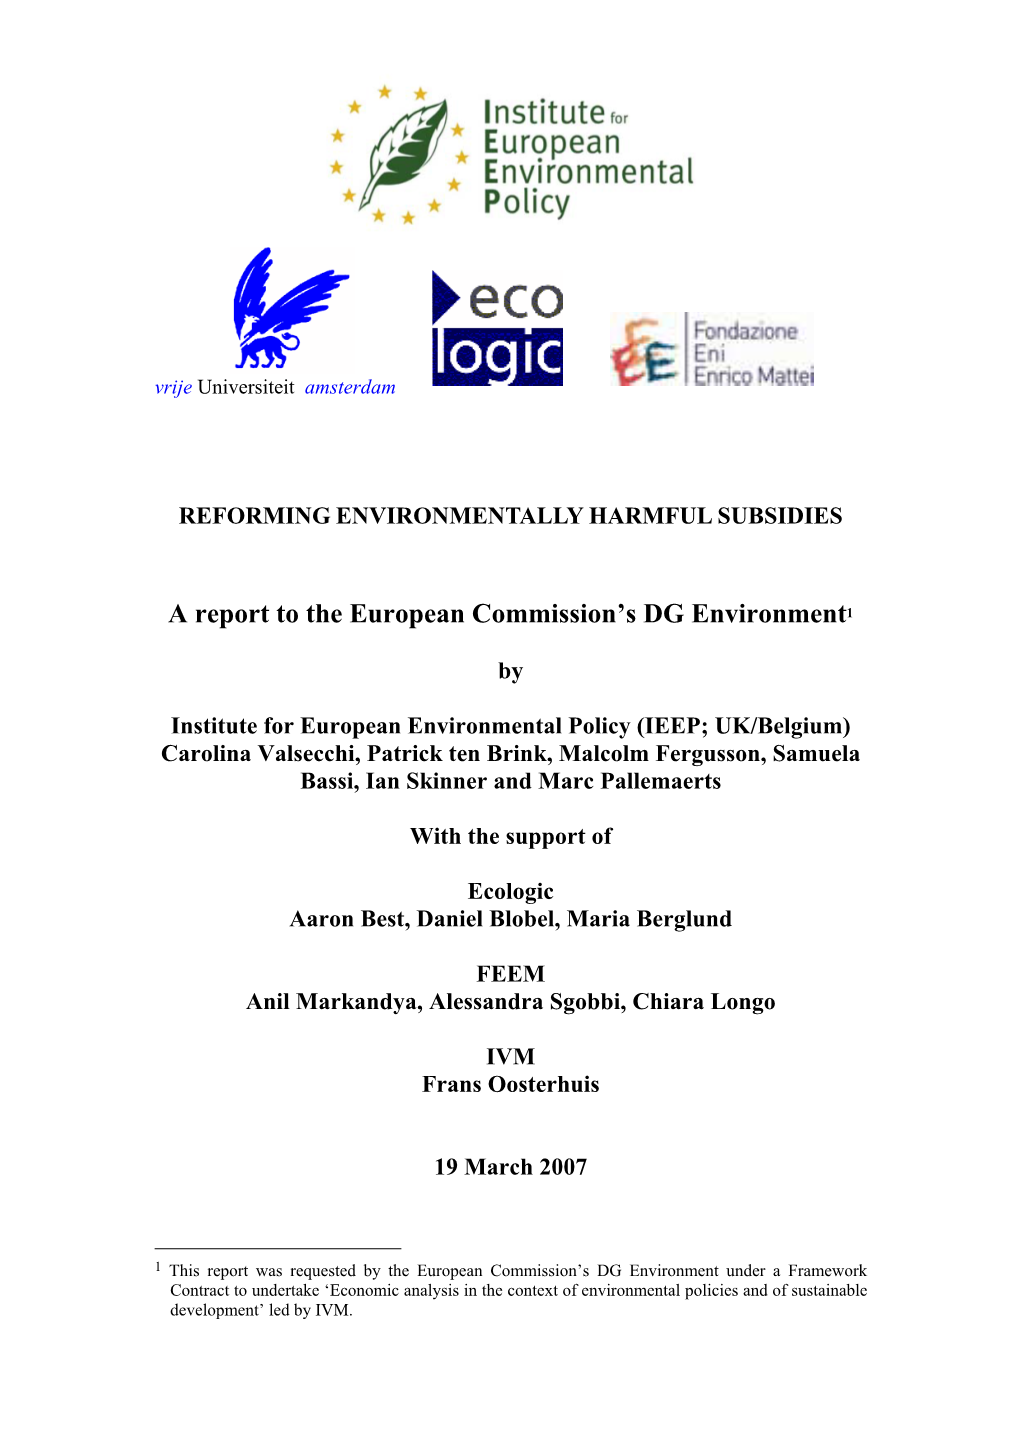 Final Report to the European Commission’S DG Environment, March 2007